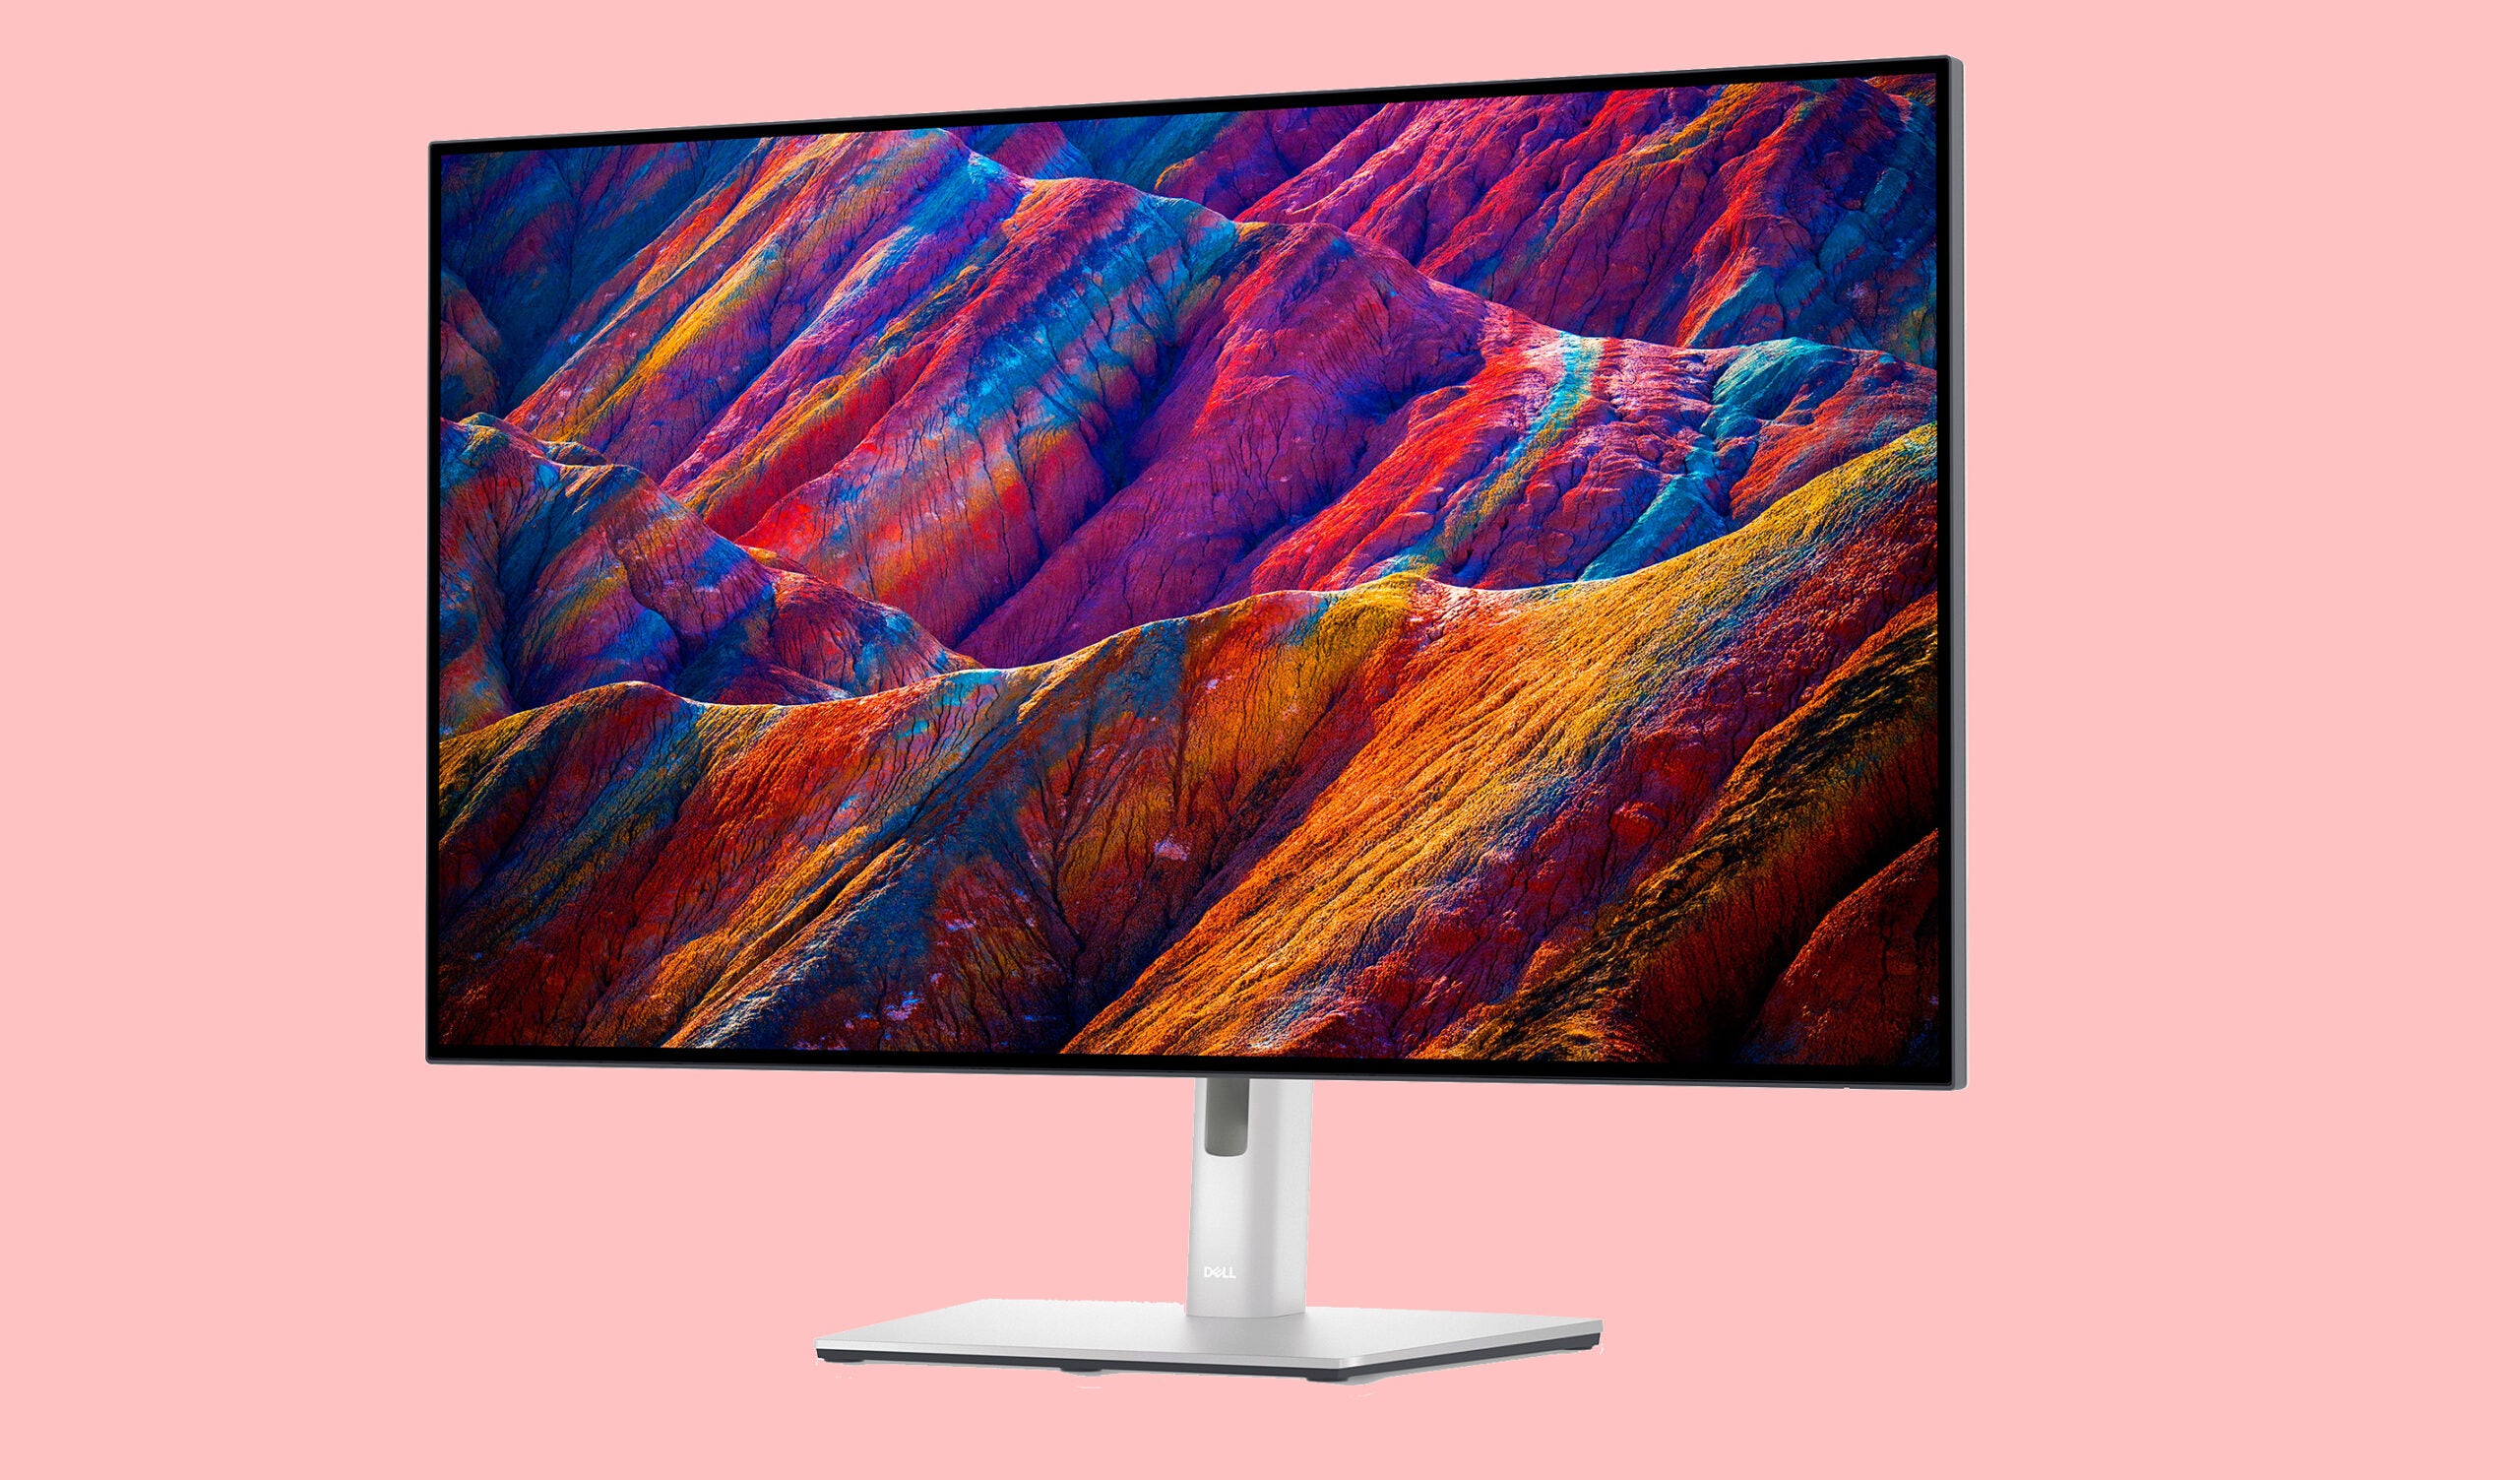 dell-s-new-4k-monitors-promise-seriously-impressive-contrast-thanks-to-ips-black-technology